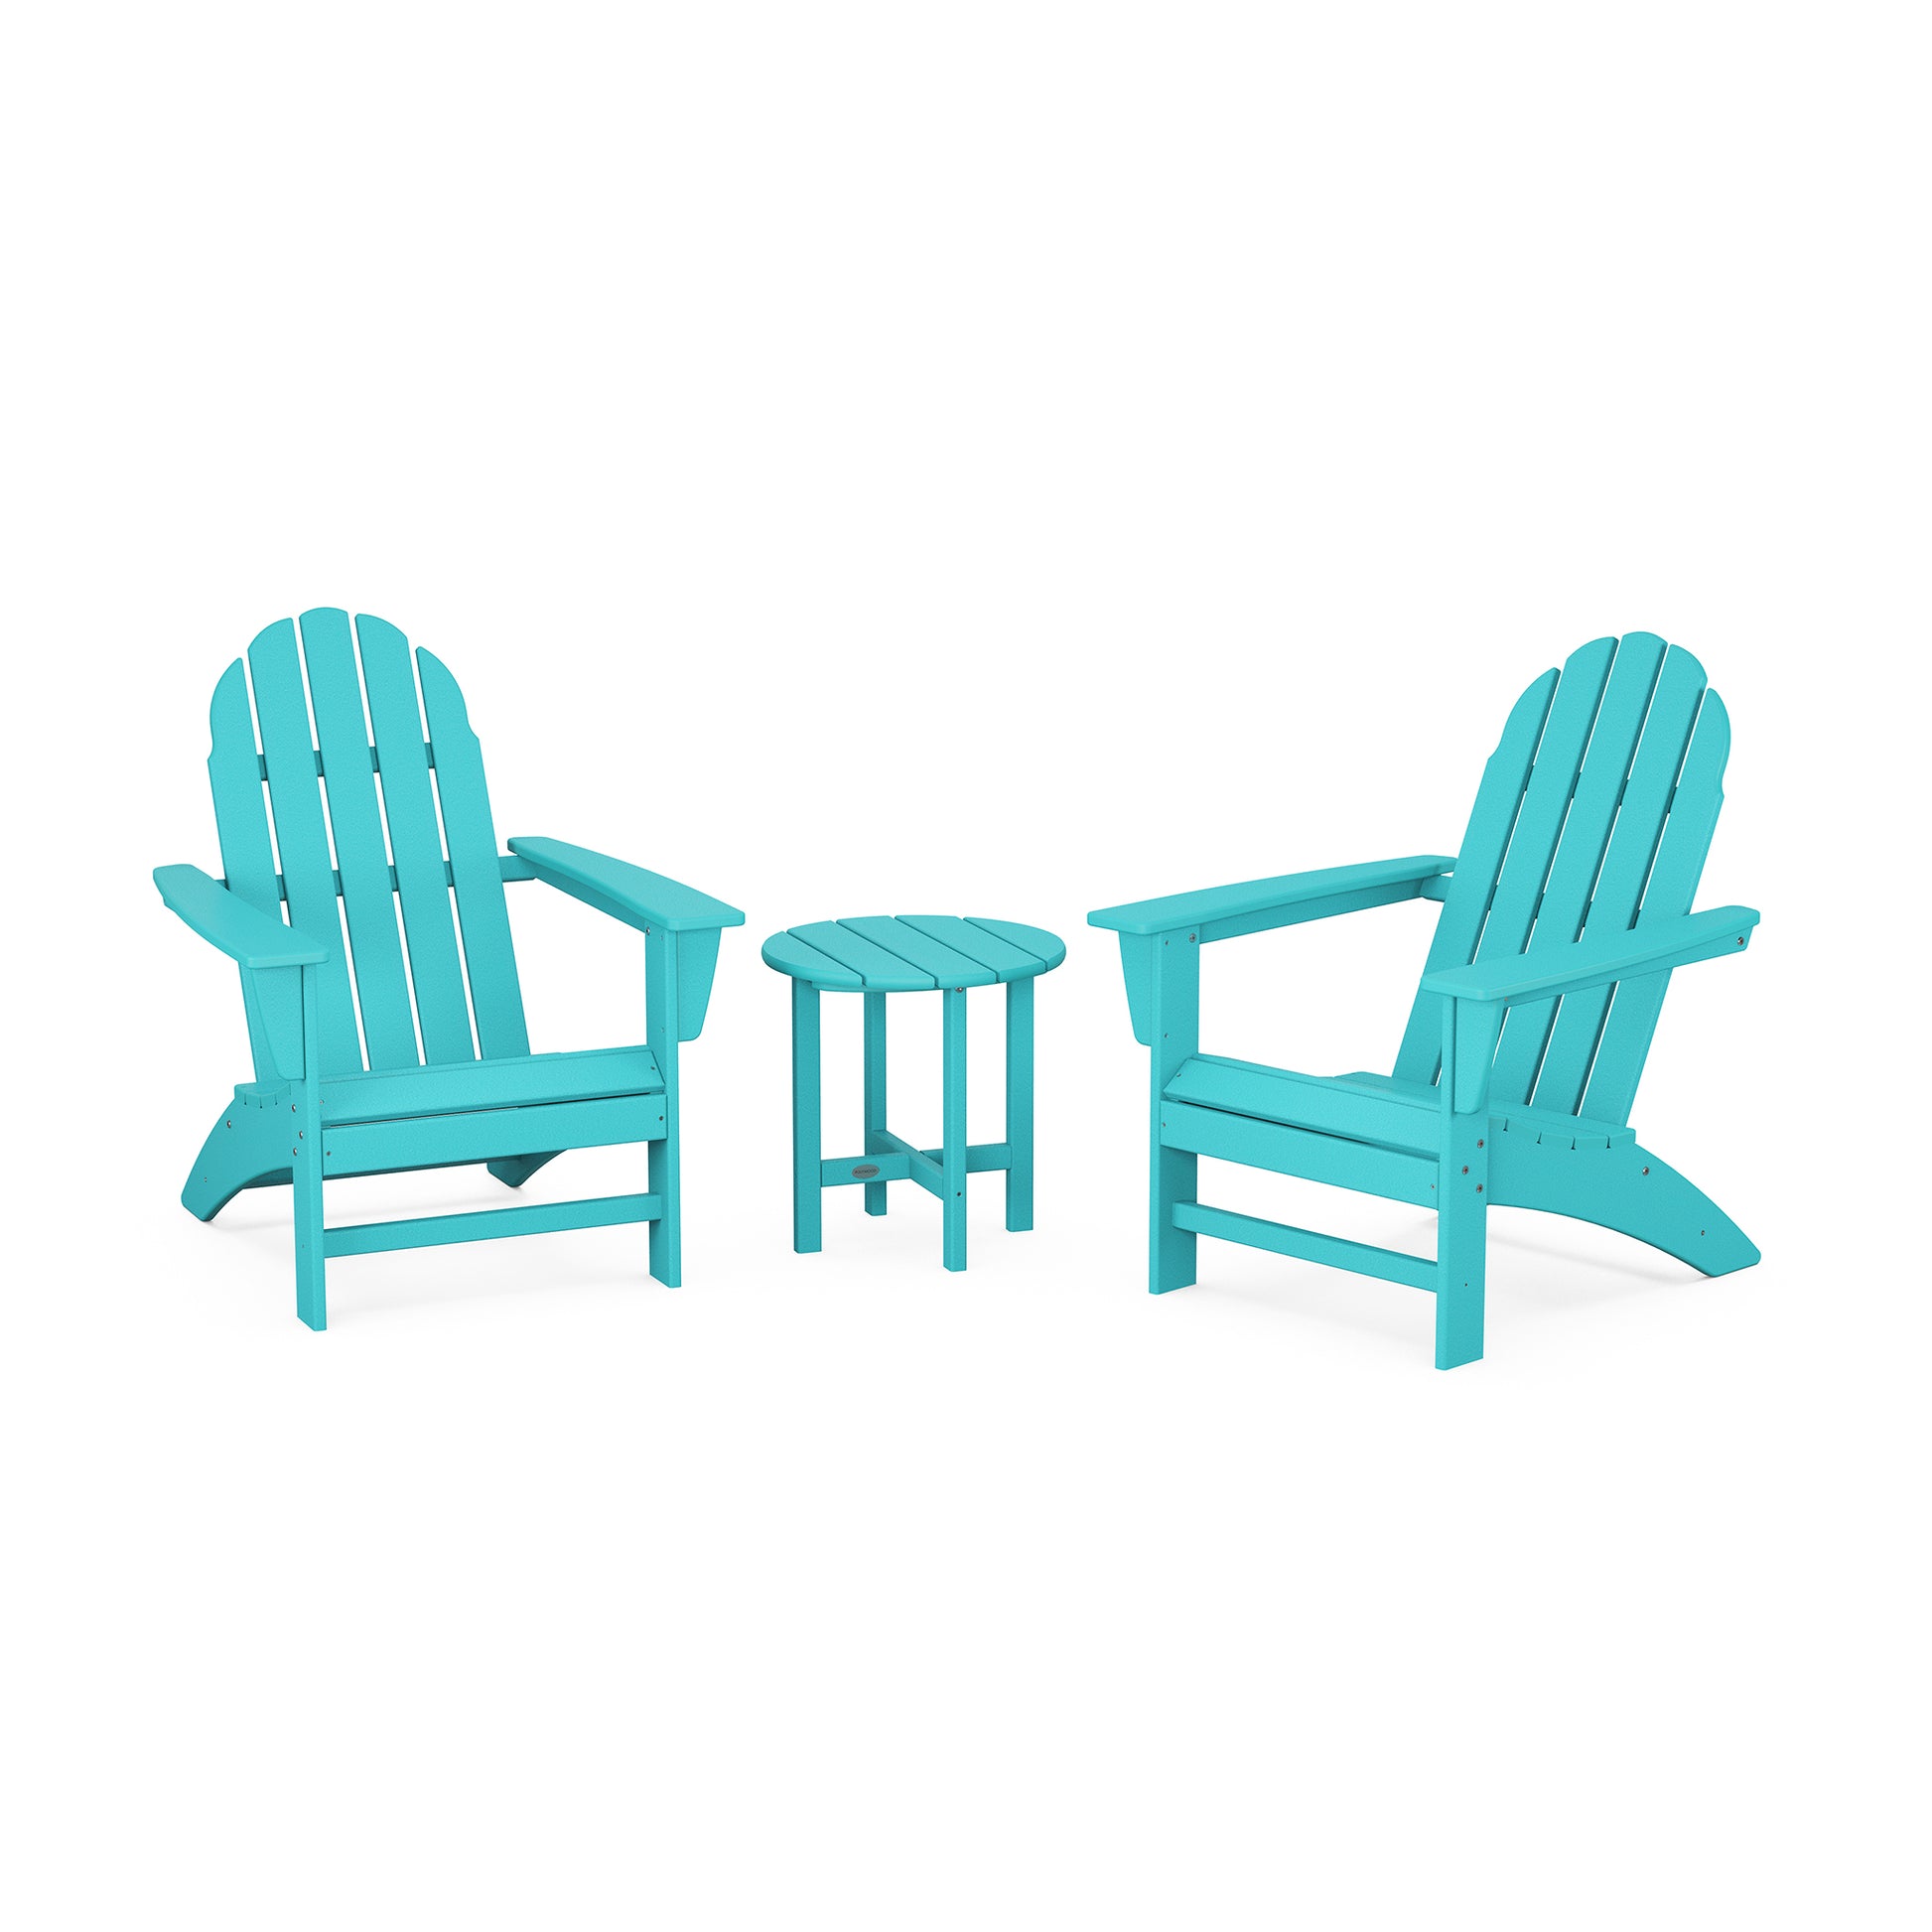 Two turquoise POLYWOOD Vineyard Adirondack chairs and a small matching table set against a plain white background.